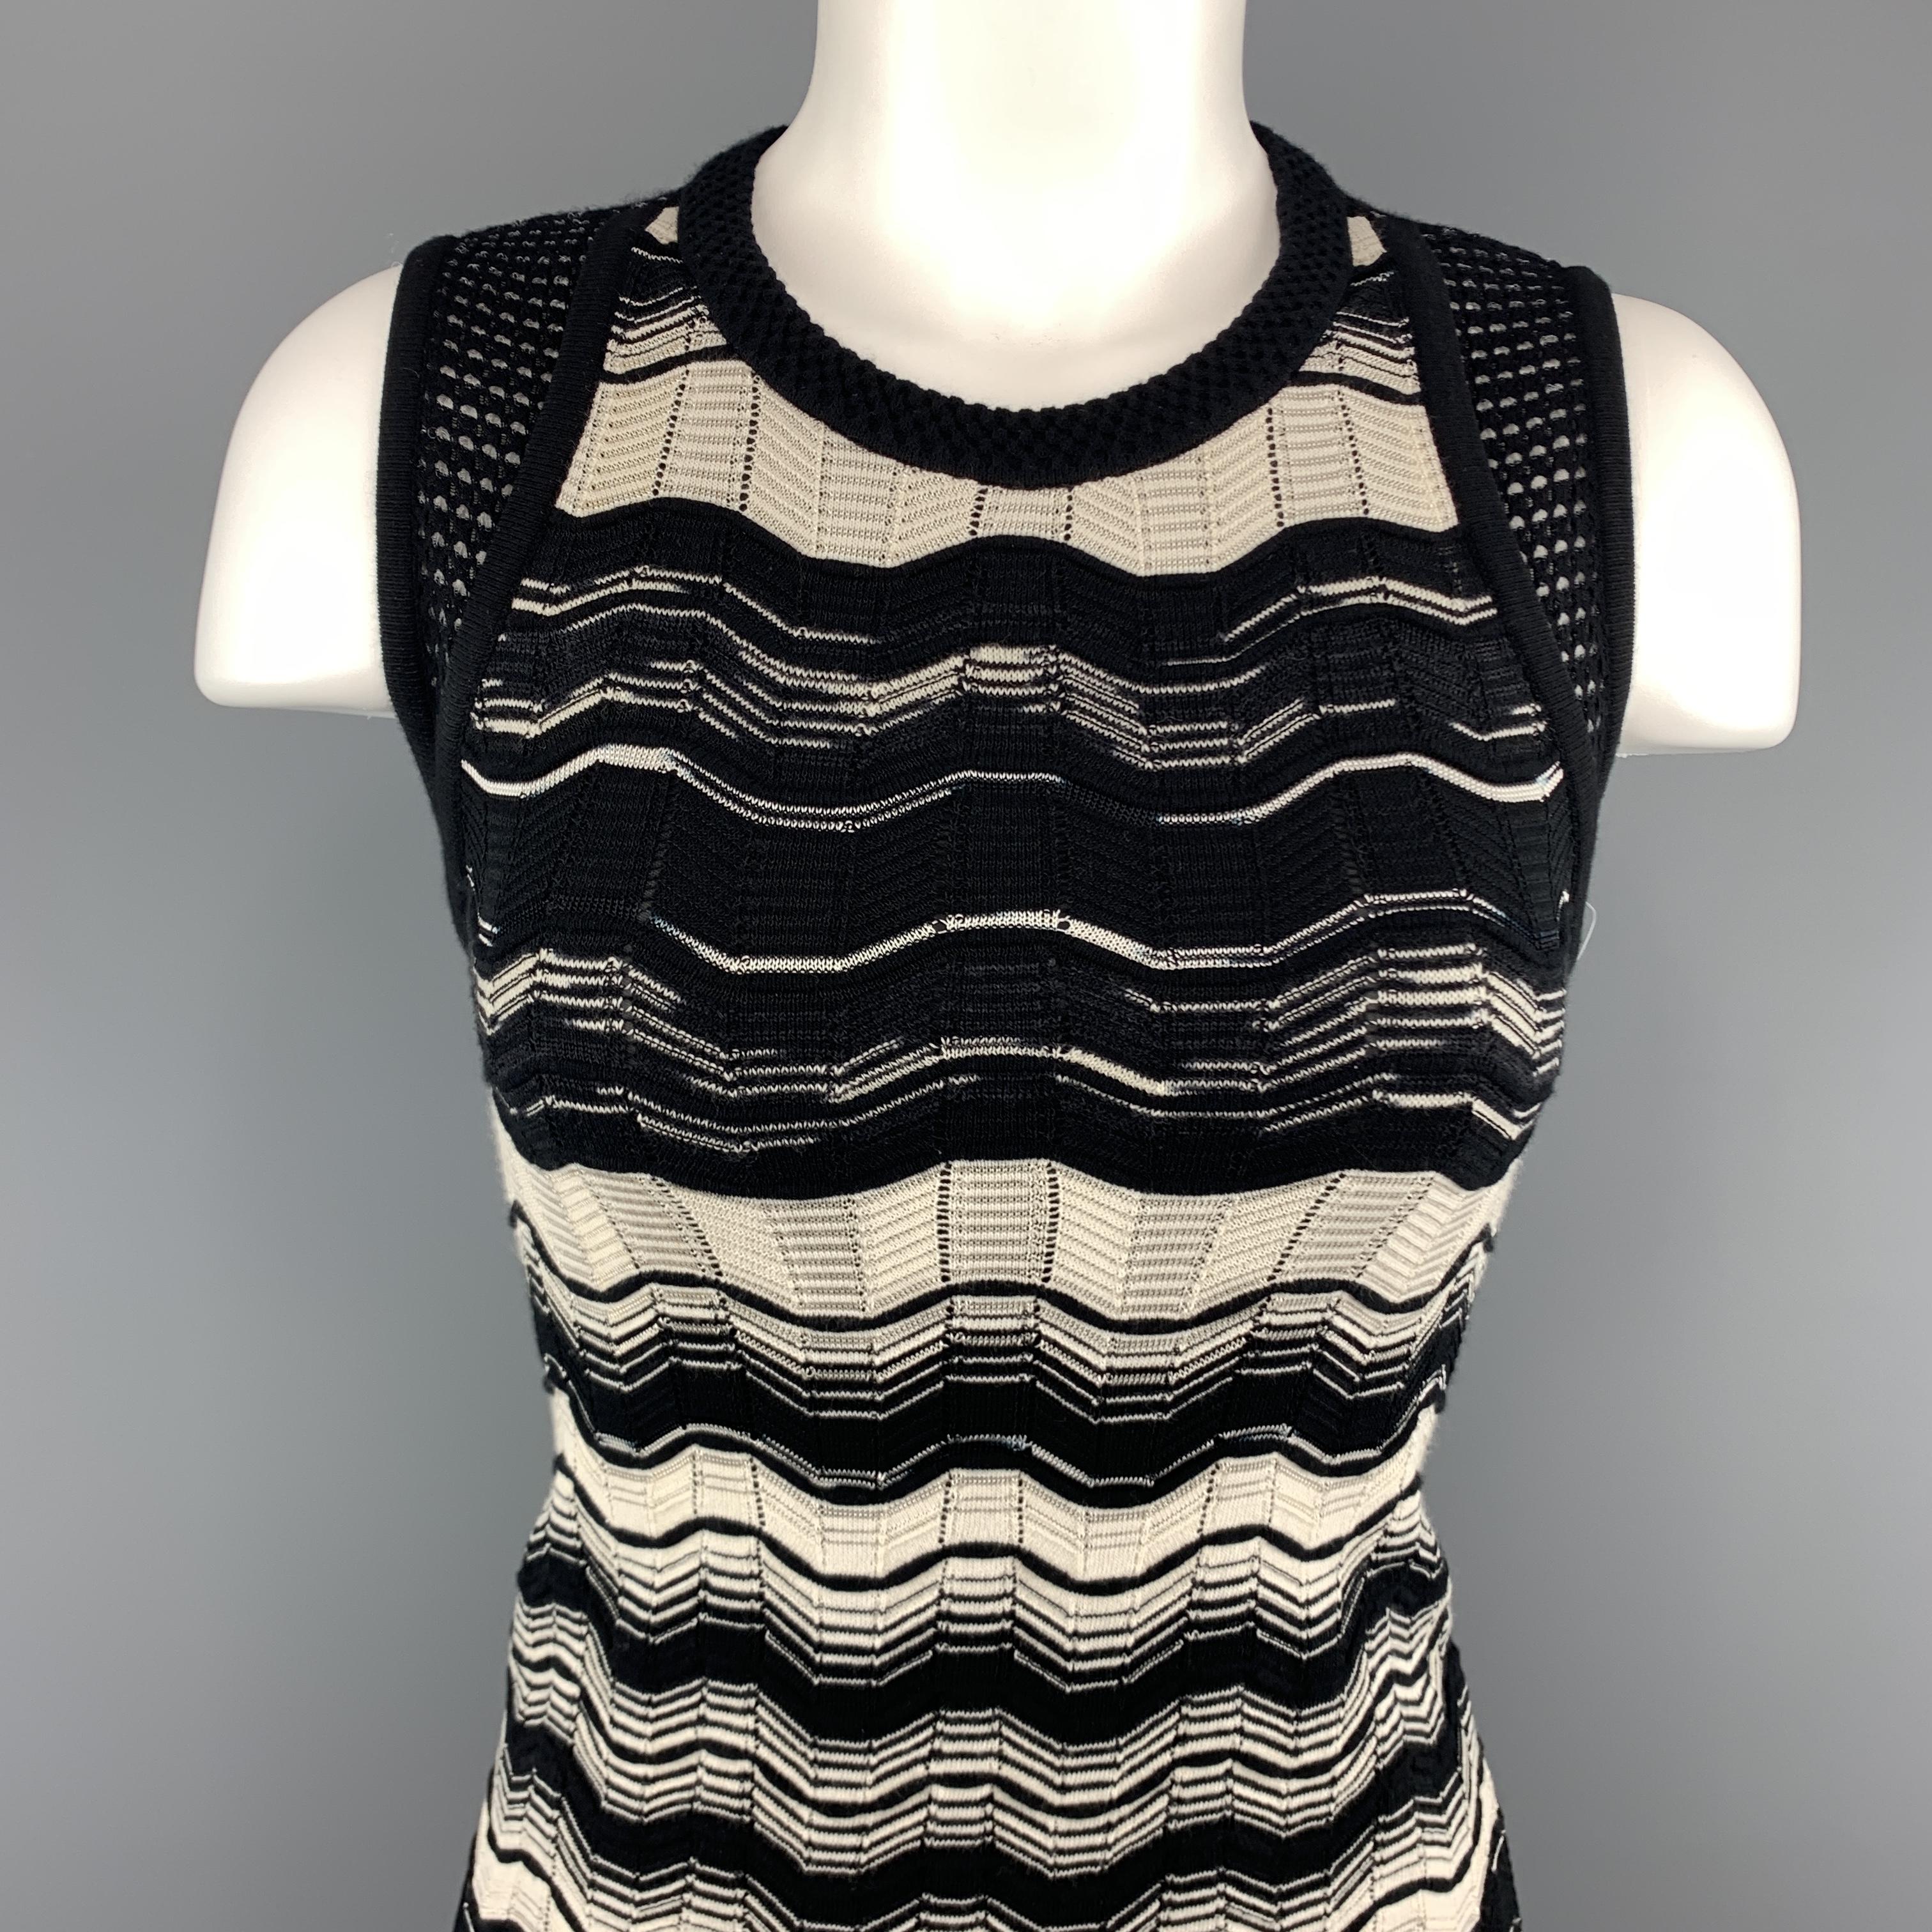 M MISSONI dress comes in a beige and black textured stripe knit with a round neckline, and mesh knit shoulder panels.
 
Excellent Pre-Owned Condition.
Marked: 2
 
Measurements:
 
Shoulder: 12 in.
Bust: 34 in.
Waist: 24 in.
Hip: 34 in.
Length: 37 in.